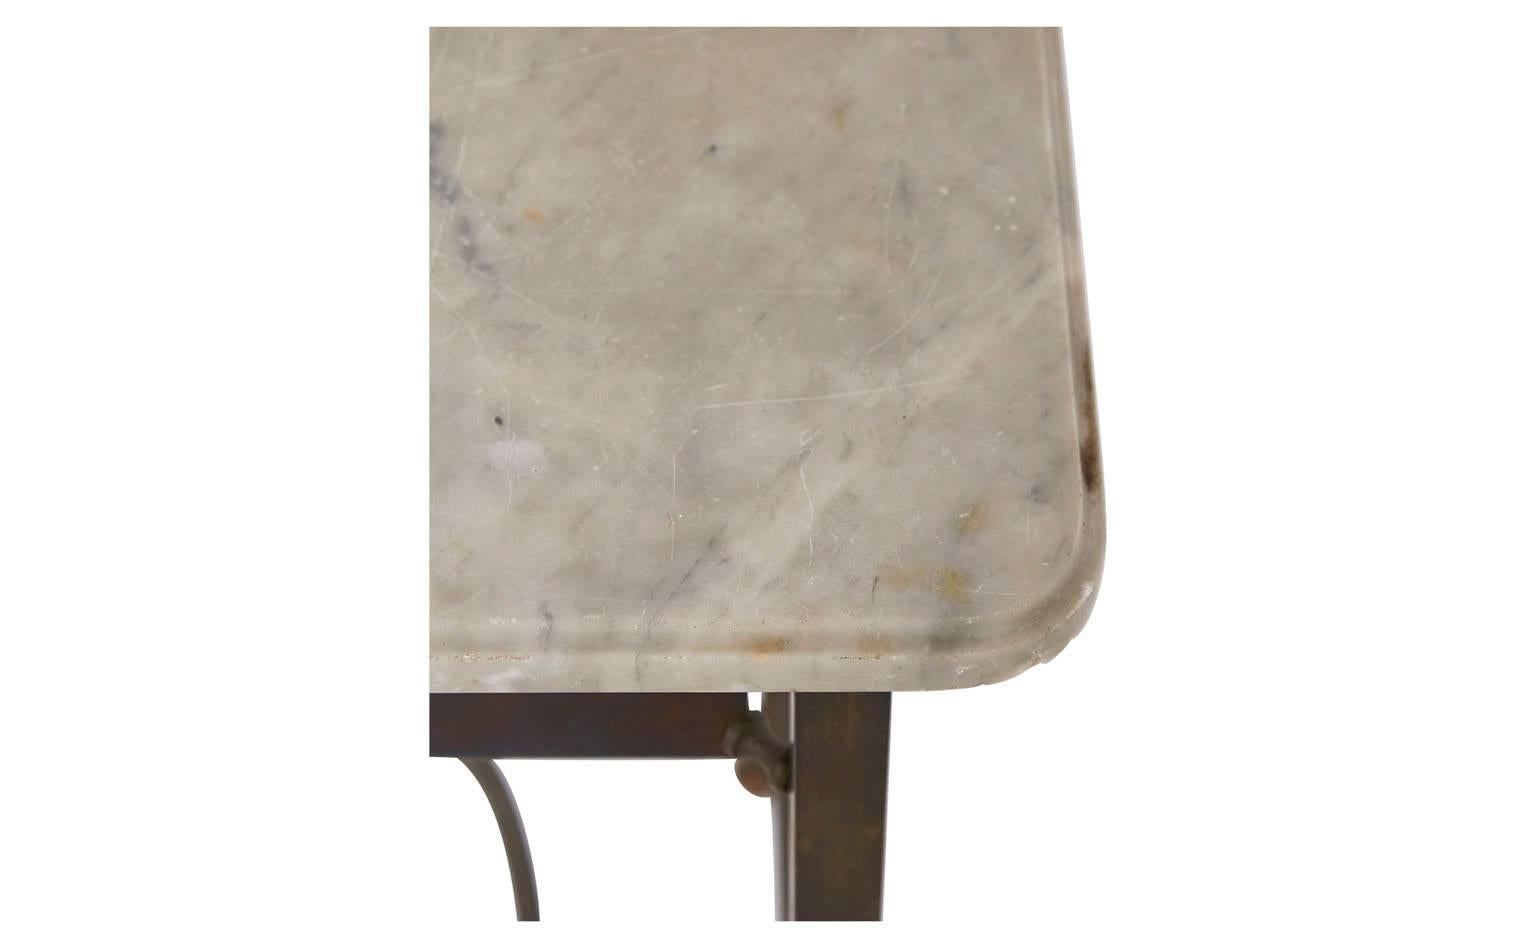 Original marble-top and brass base
Original attached mirror
20th century
France

Dimensions:
vanity: 35.5